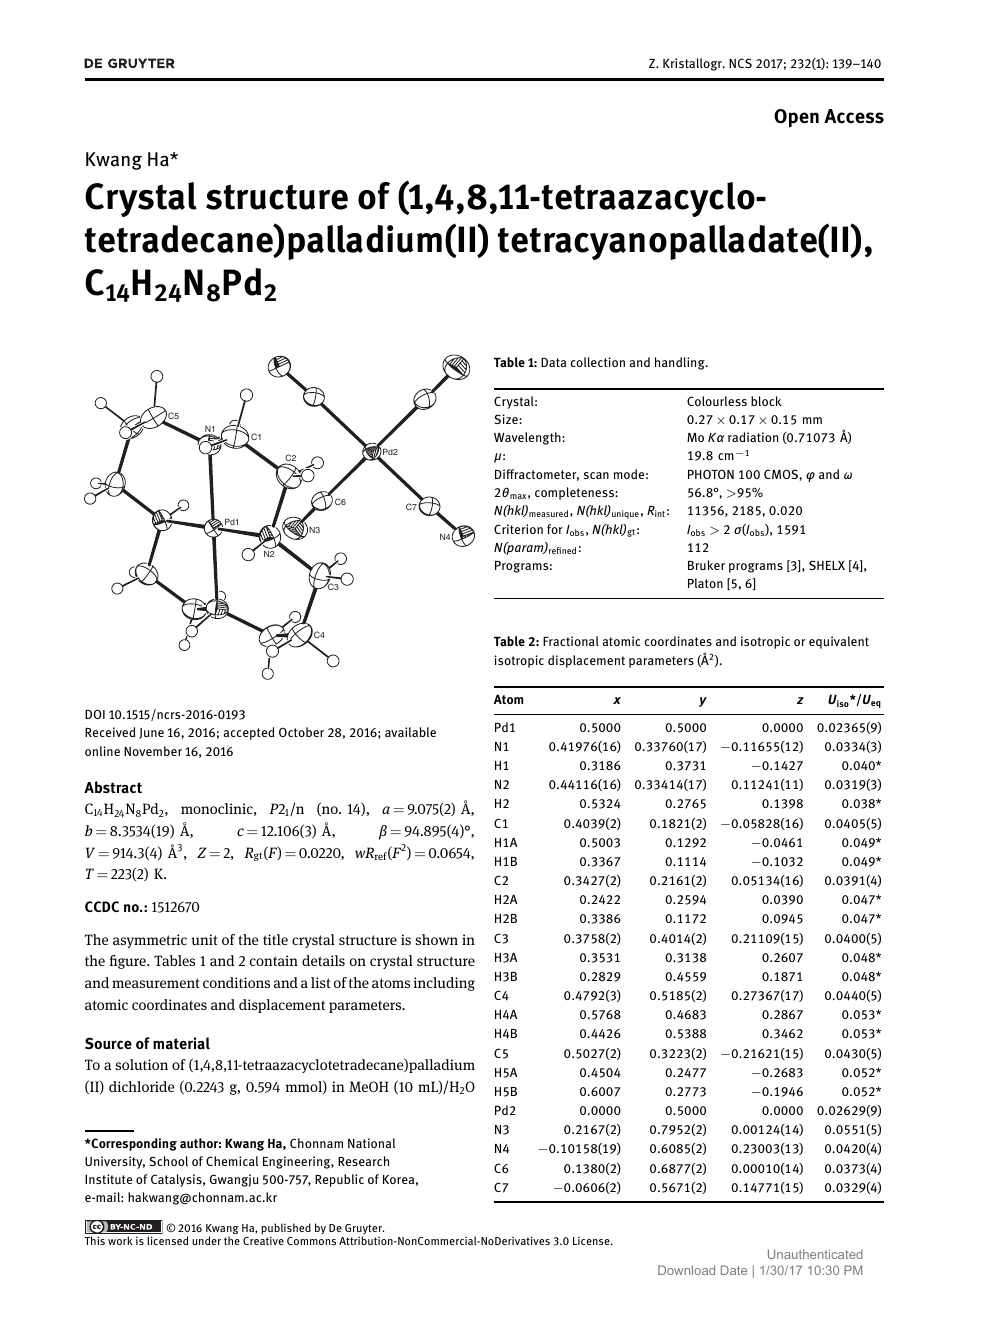 Crystal Structure Of 1 4 8 11 Tetraazacyclotetradecane Palladium Ii Tetracyanopalladate Ii C14h24n8pd2 Topic Of Research Paper In Earth And Related Environmental Sciences Download Scholarly Article Pdf And Read For Free On Cyberleninka Open